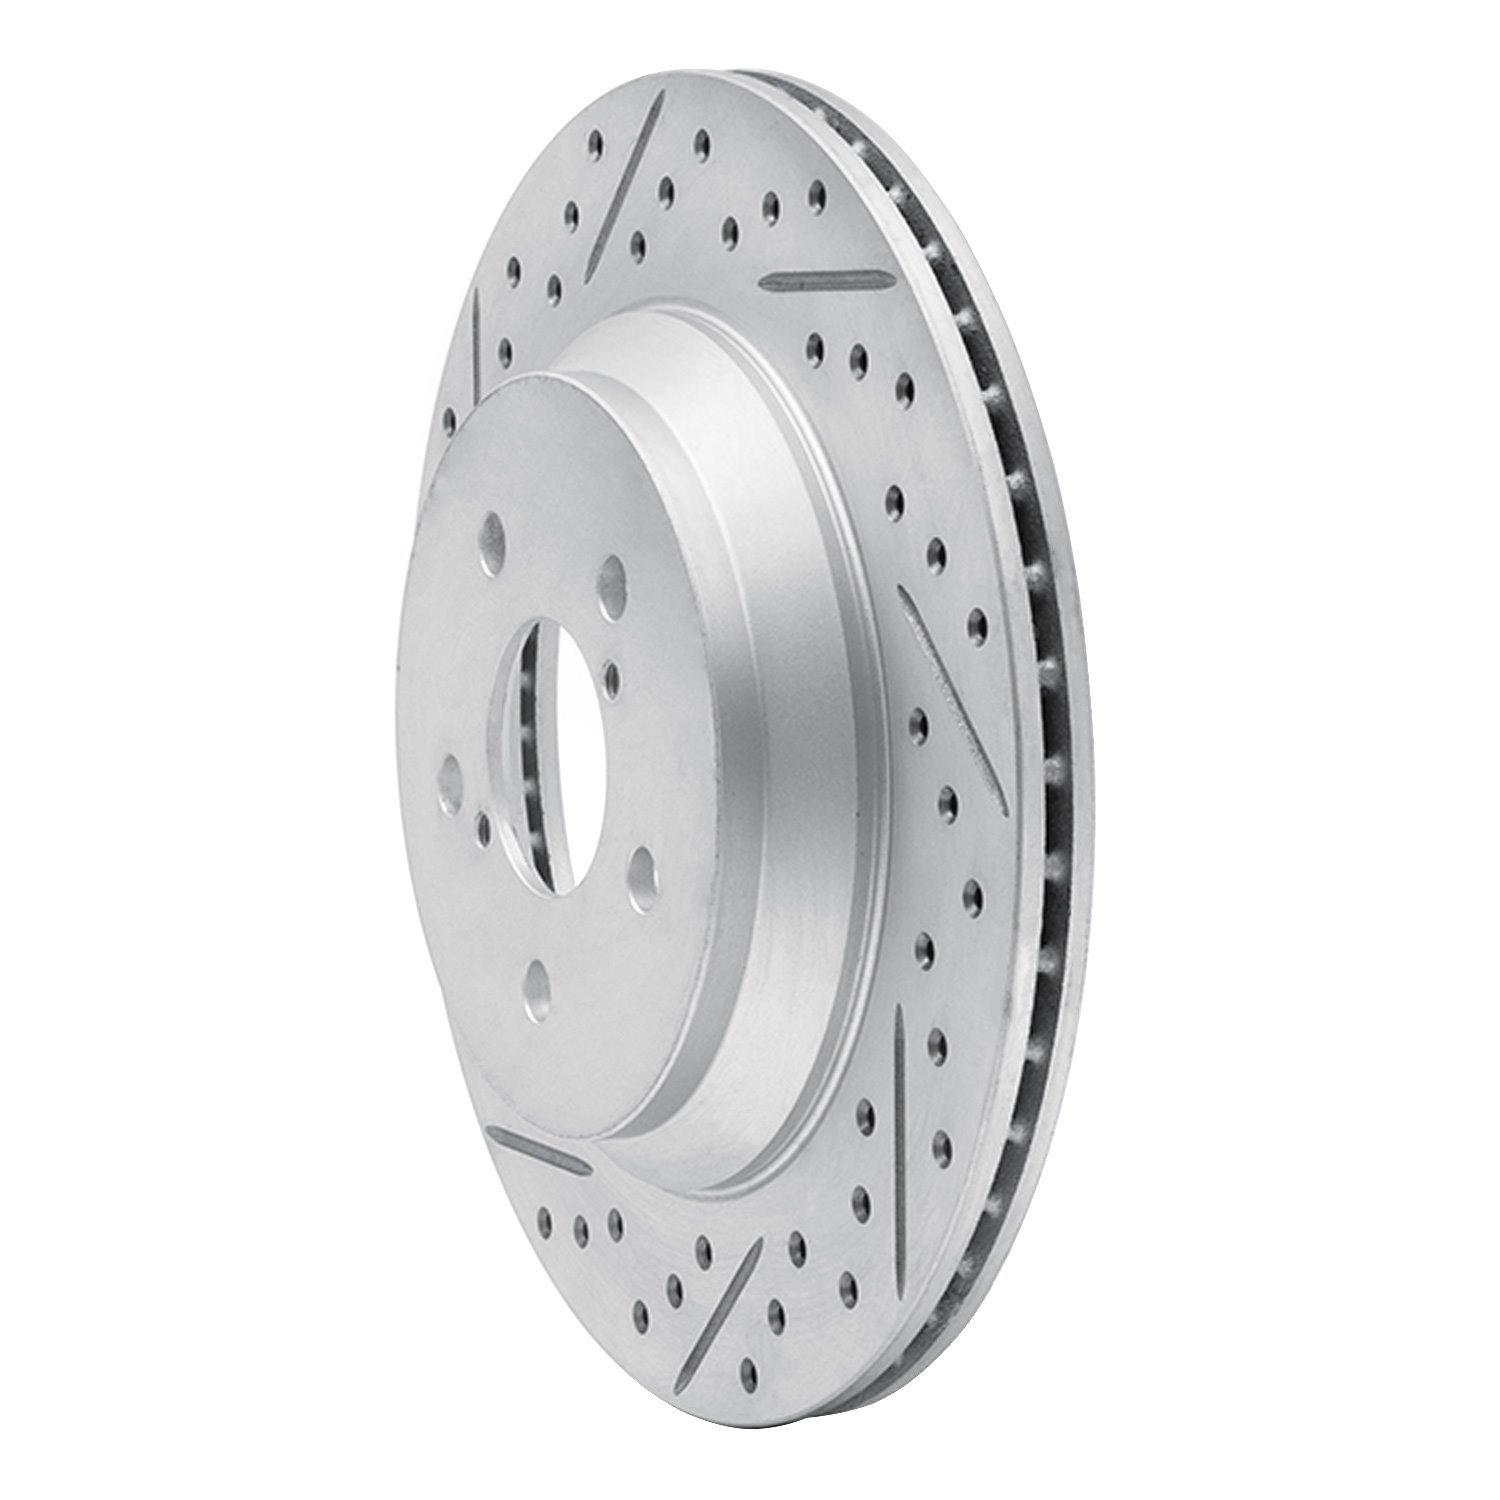 830-13047L Geoperformance Drilled/Slotted Brake Rotor, Fits Select Subaru, Position: Rear Left